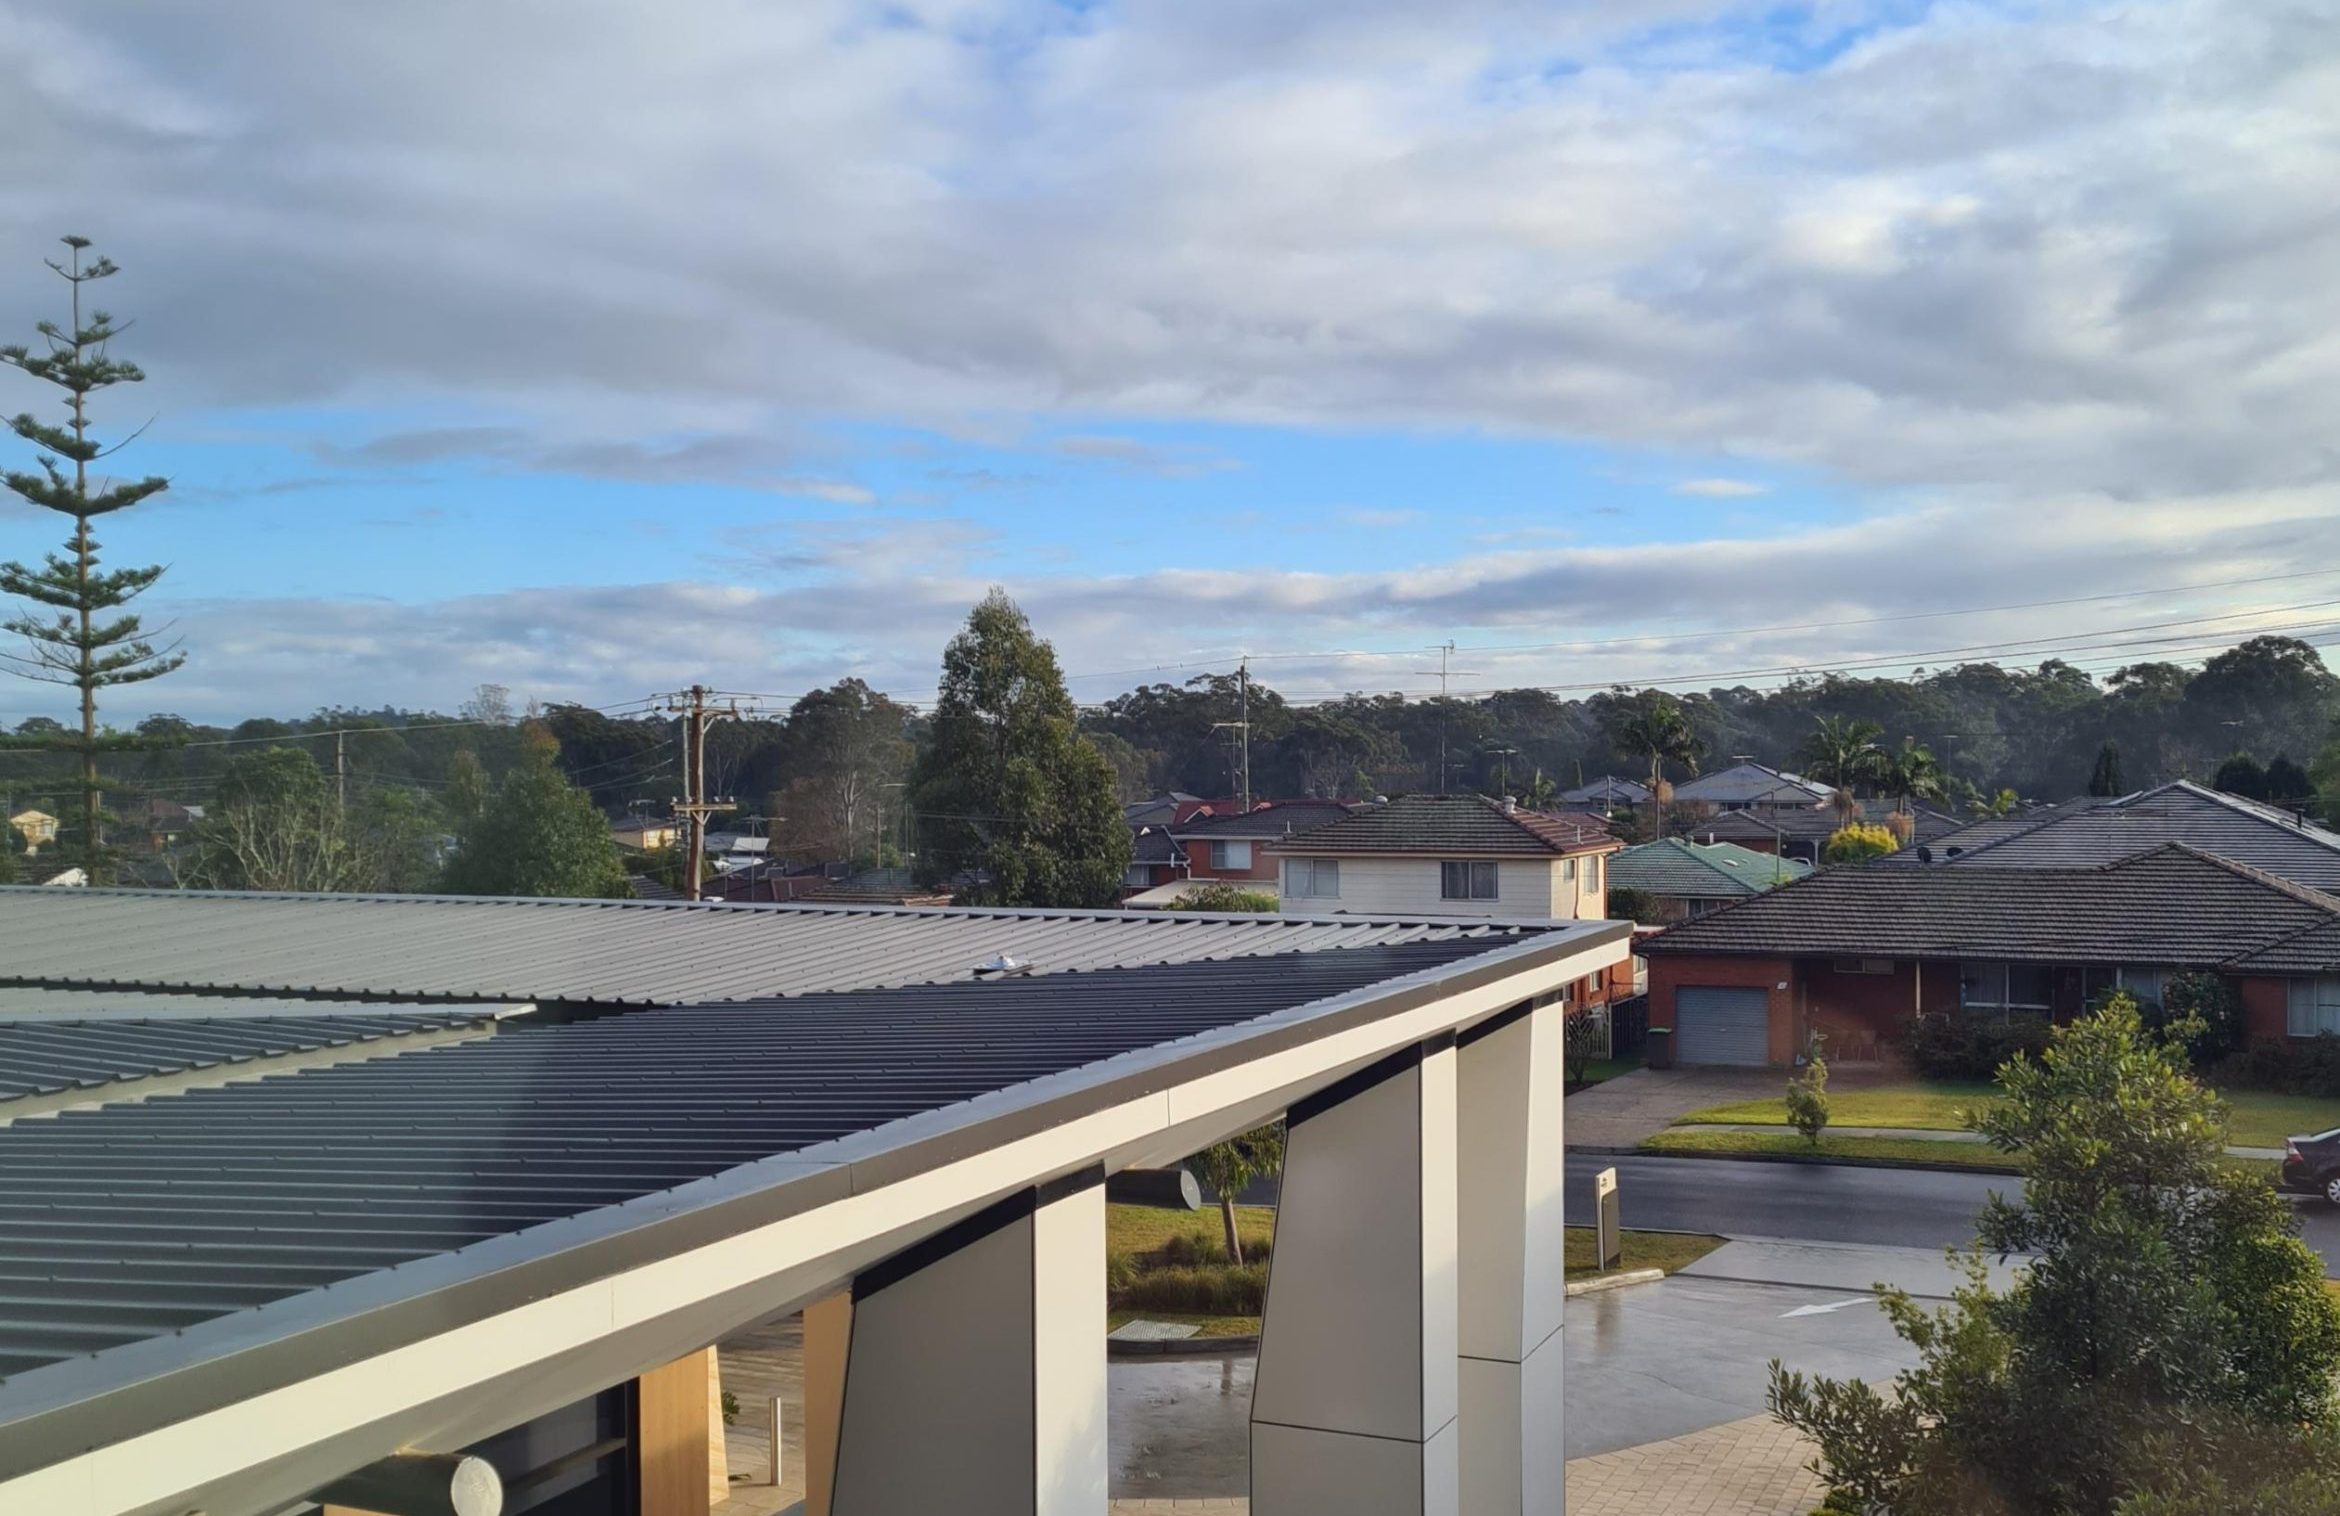 Outbreak: my experience working inside a COVID-19 positive aged care facility (part 2)